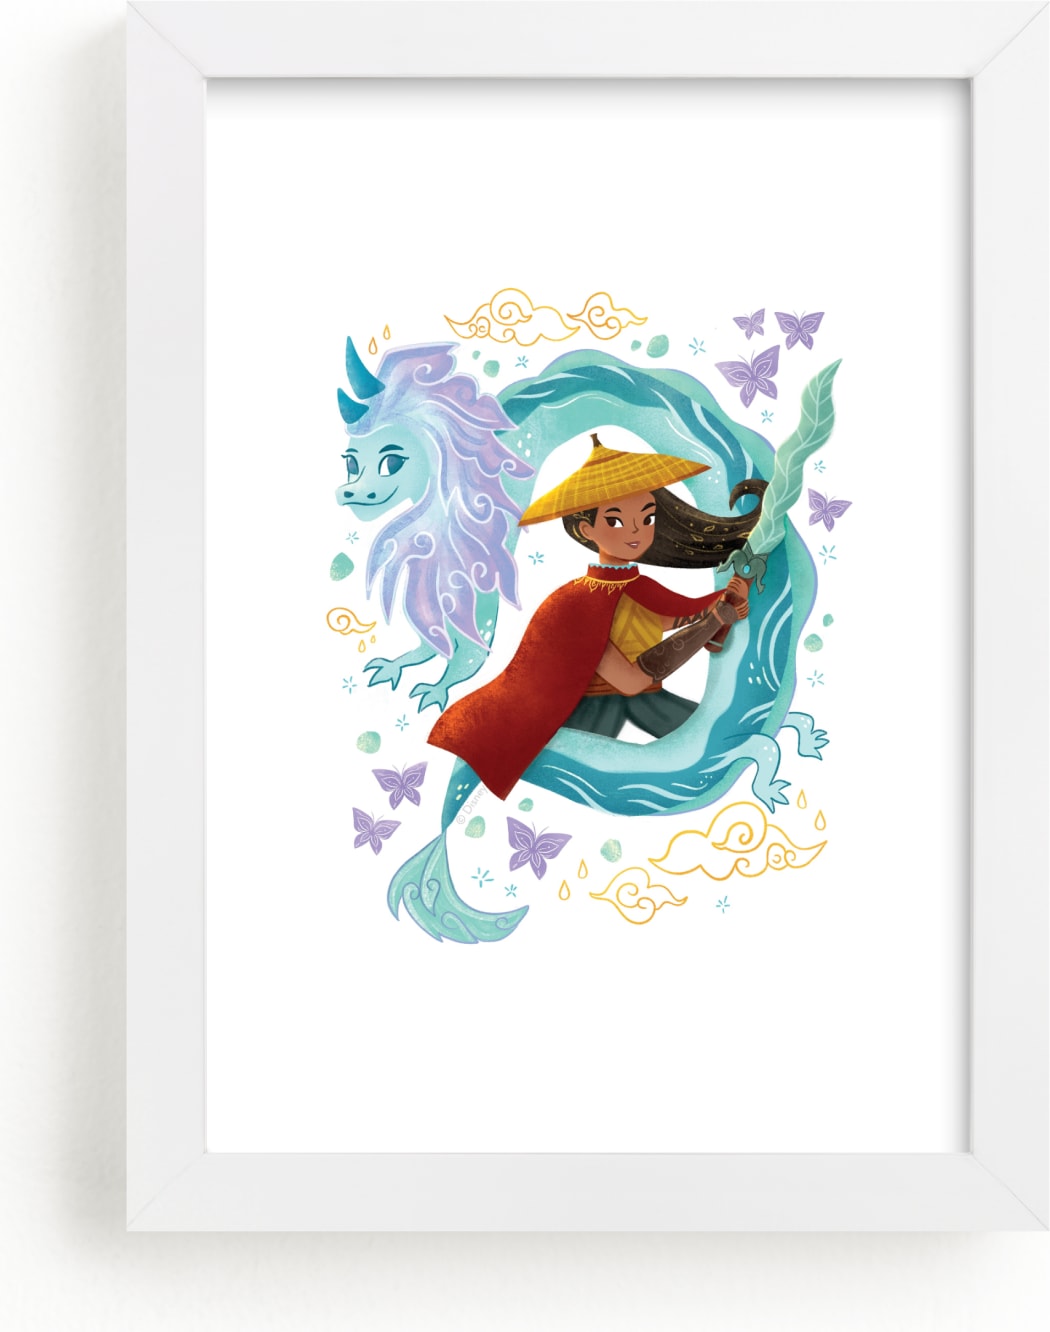 This is a blue, colorful, red disney art by curiouszhi called Disney's Warrior Princess Raya.